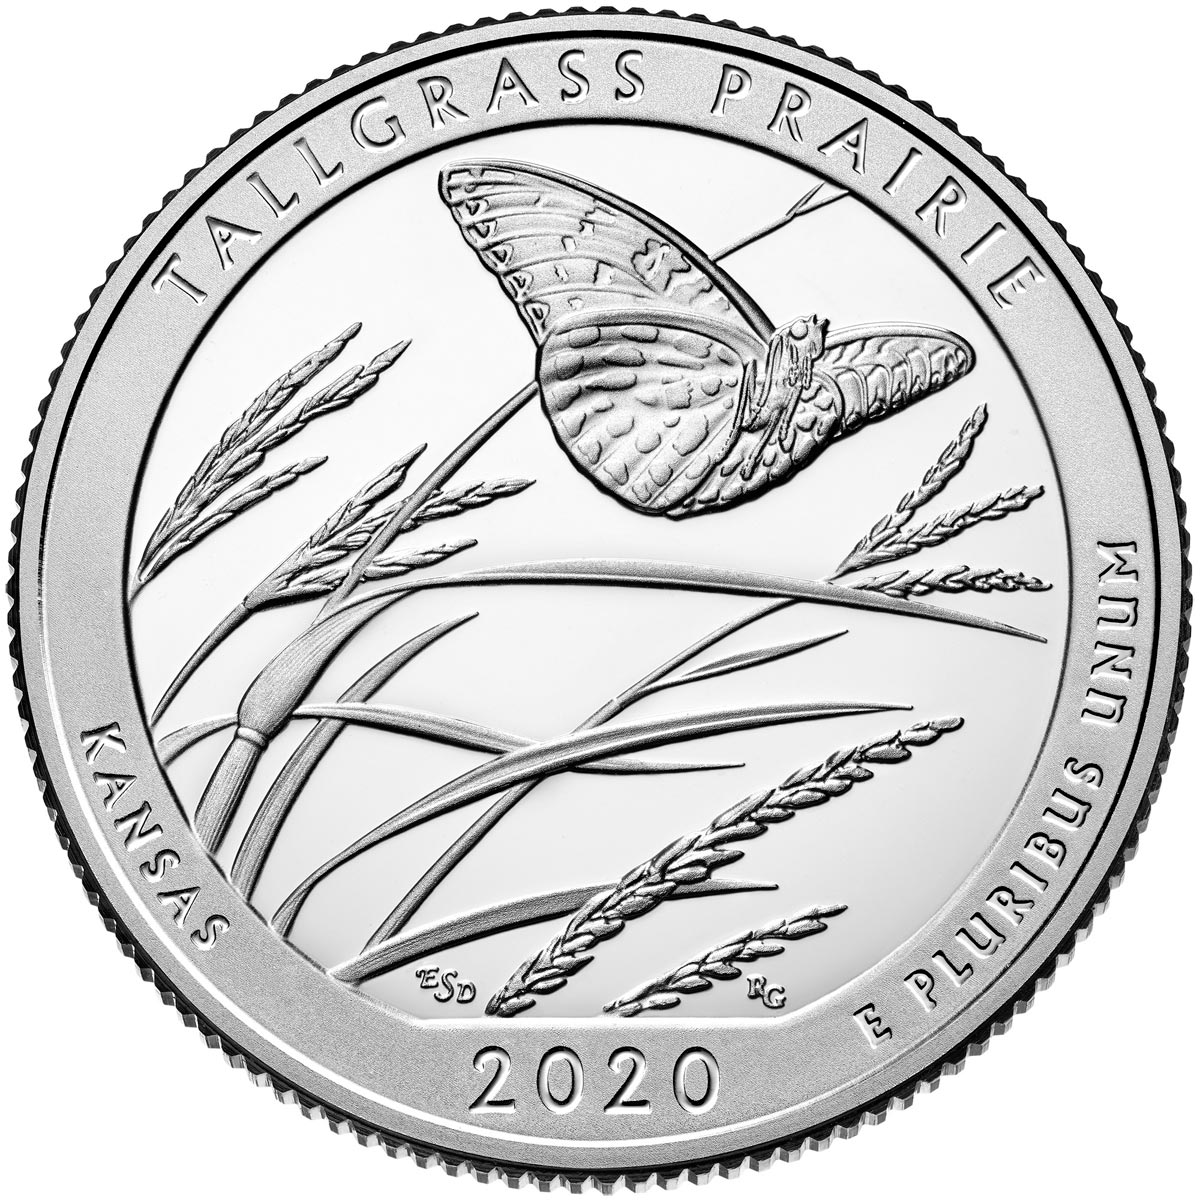 Image of 25 cents coin - Tallgrass Prairie National Preserve Site | USA 2020.  The Copper–Nickel (CuNi) coin is of Proof, BU, UNC quality.